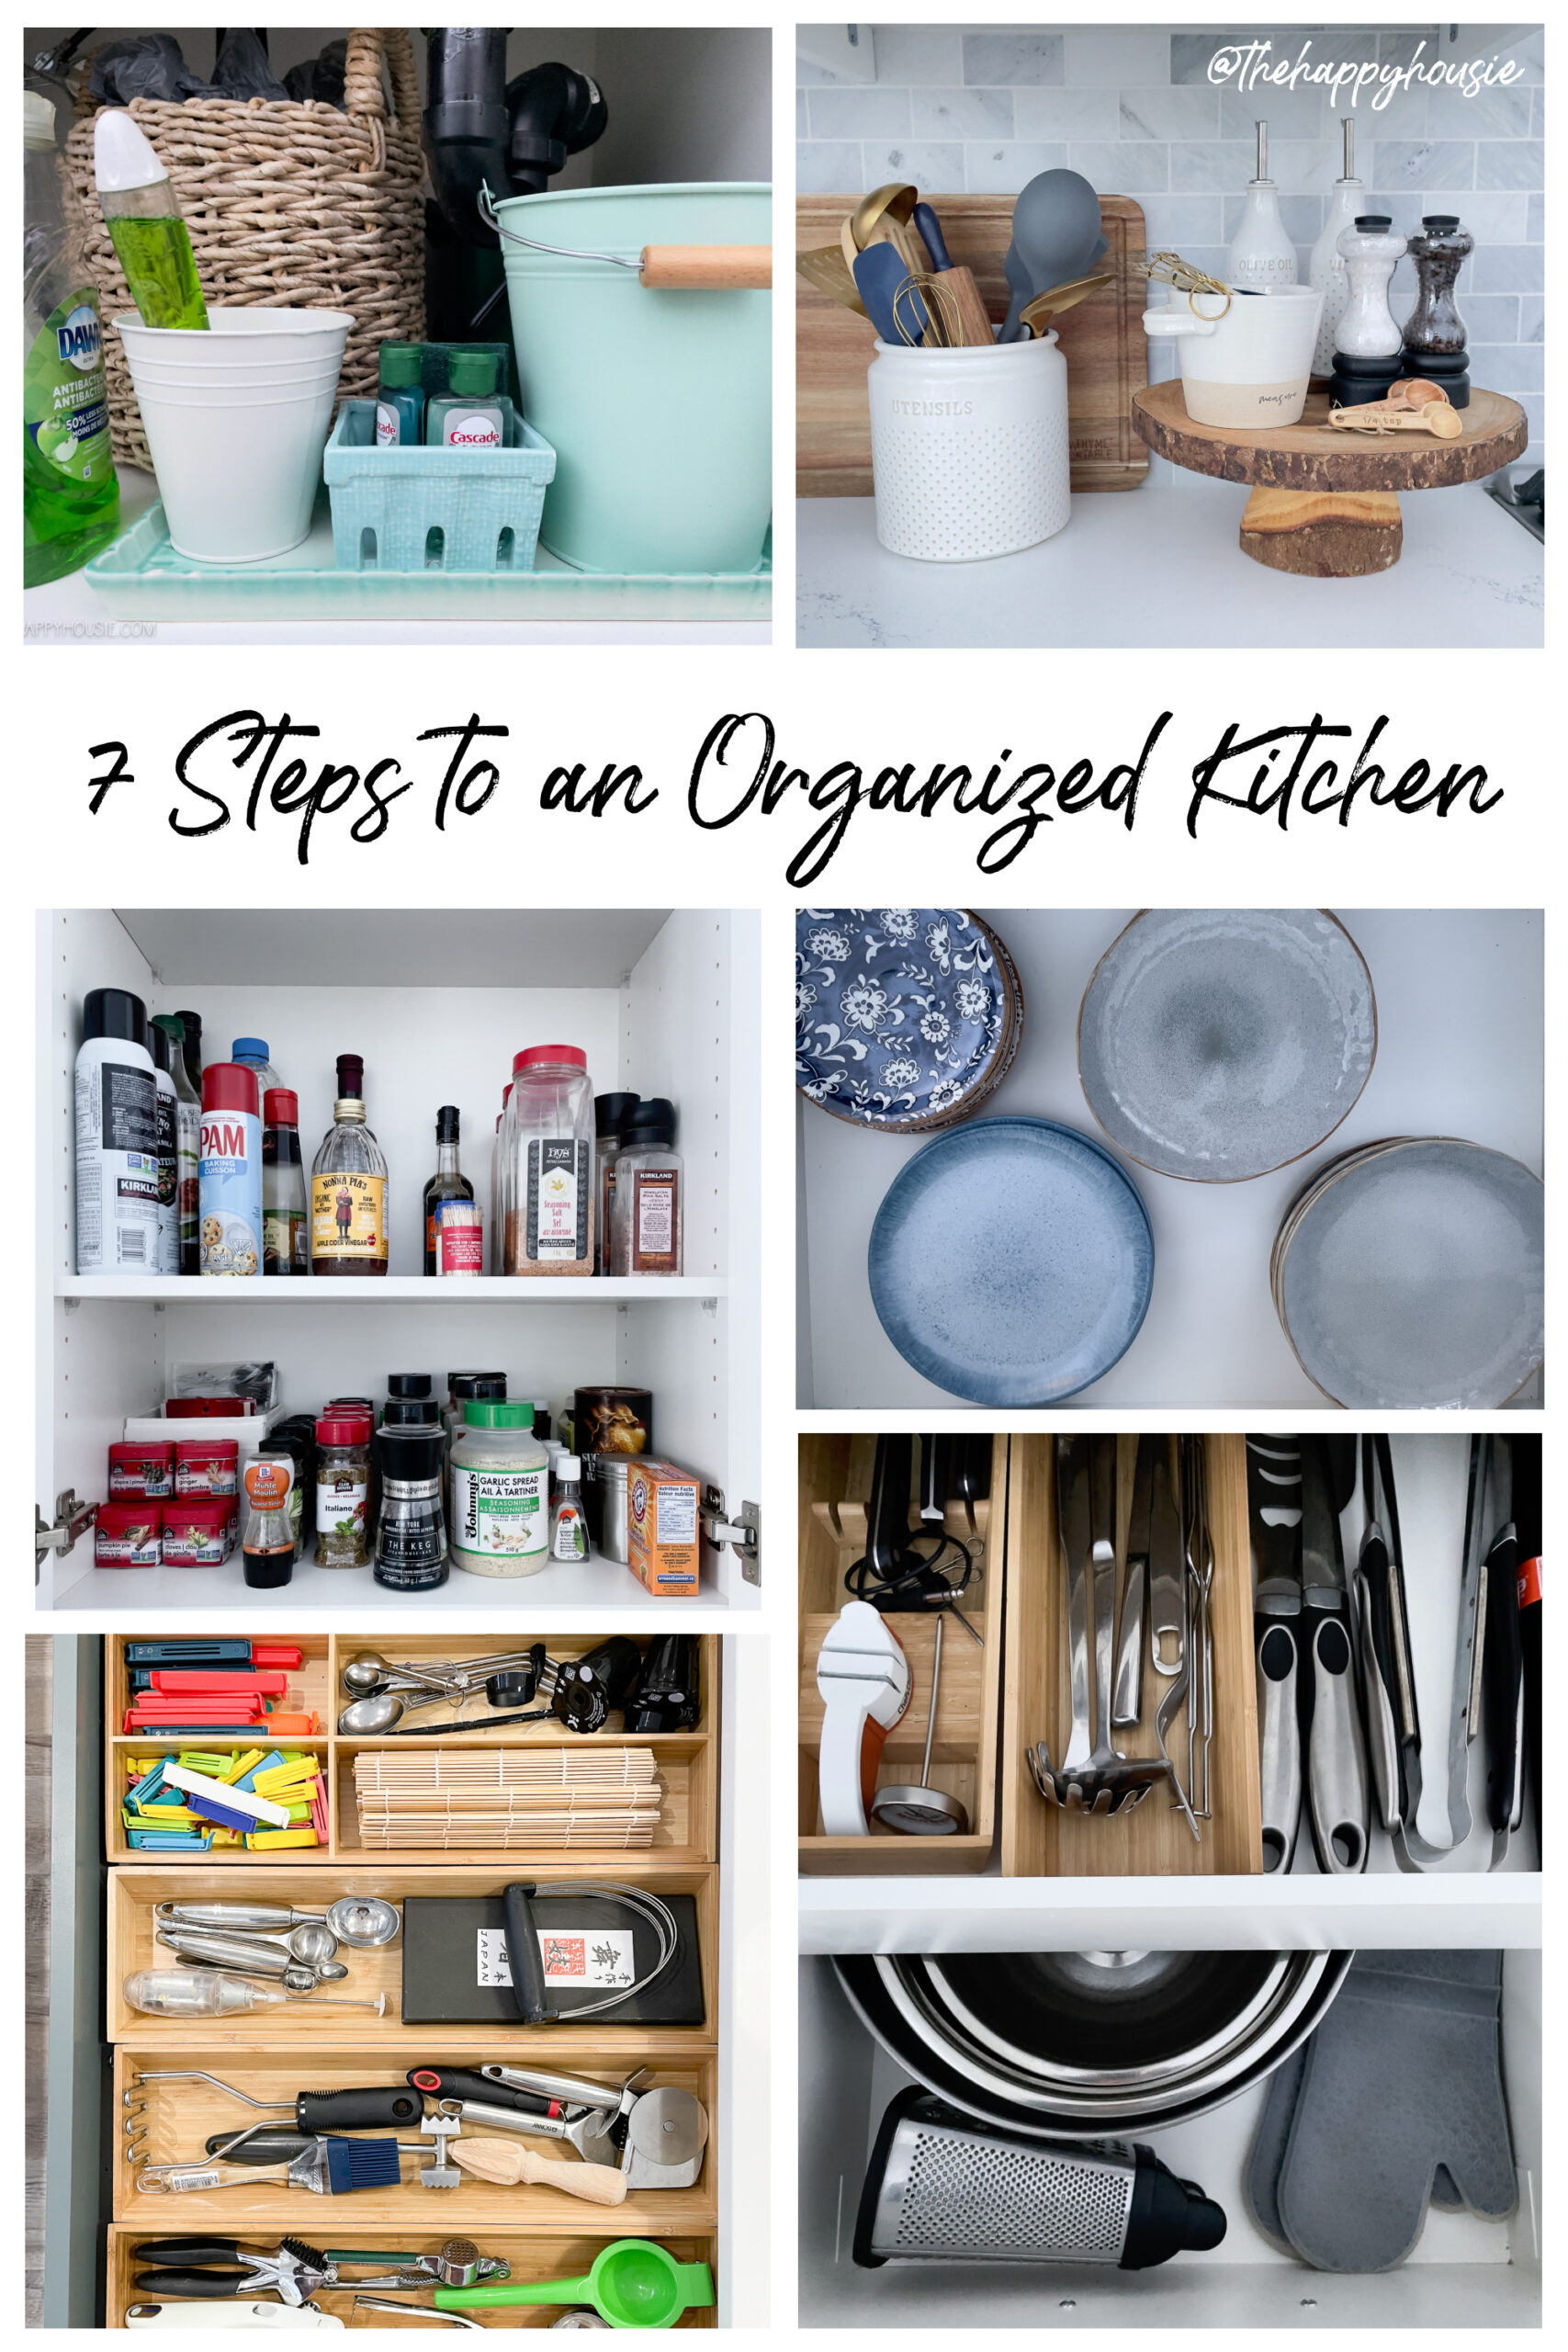 https://www.thehappyhousie.com/wp-content/uploads/2022/01/7-steps-to-an-efficient-and-organized-kitchen-scaled.jpg